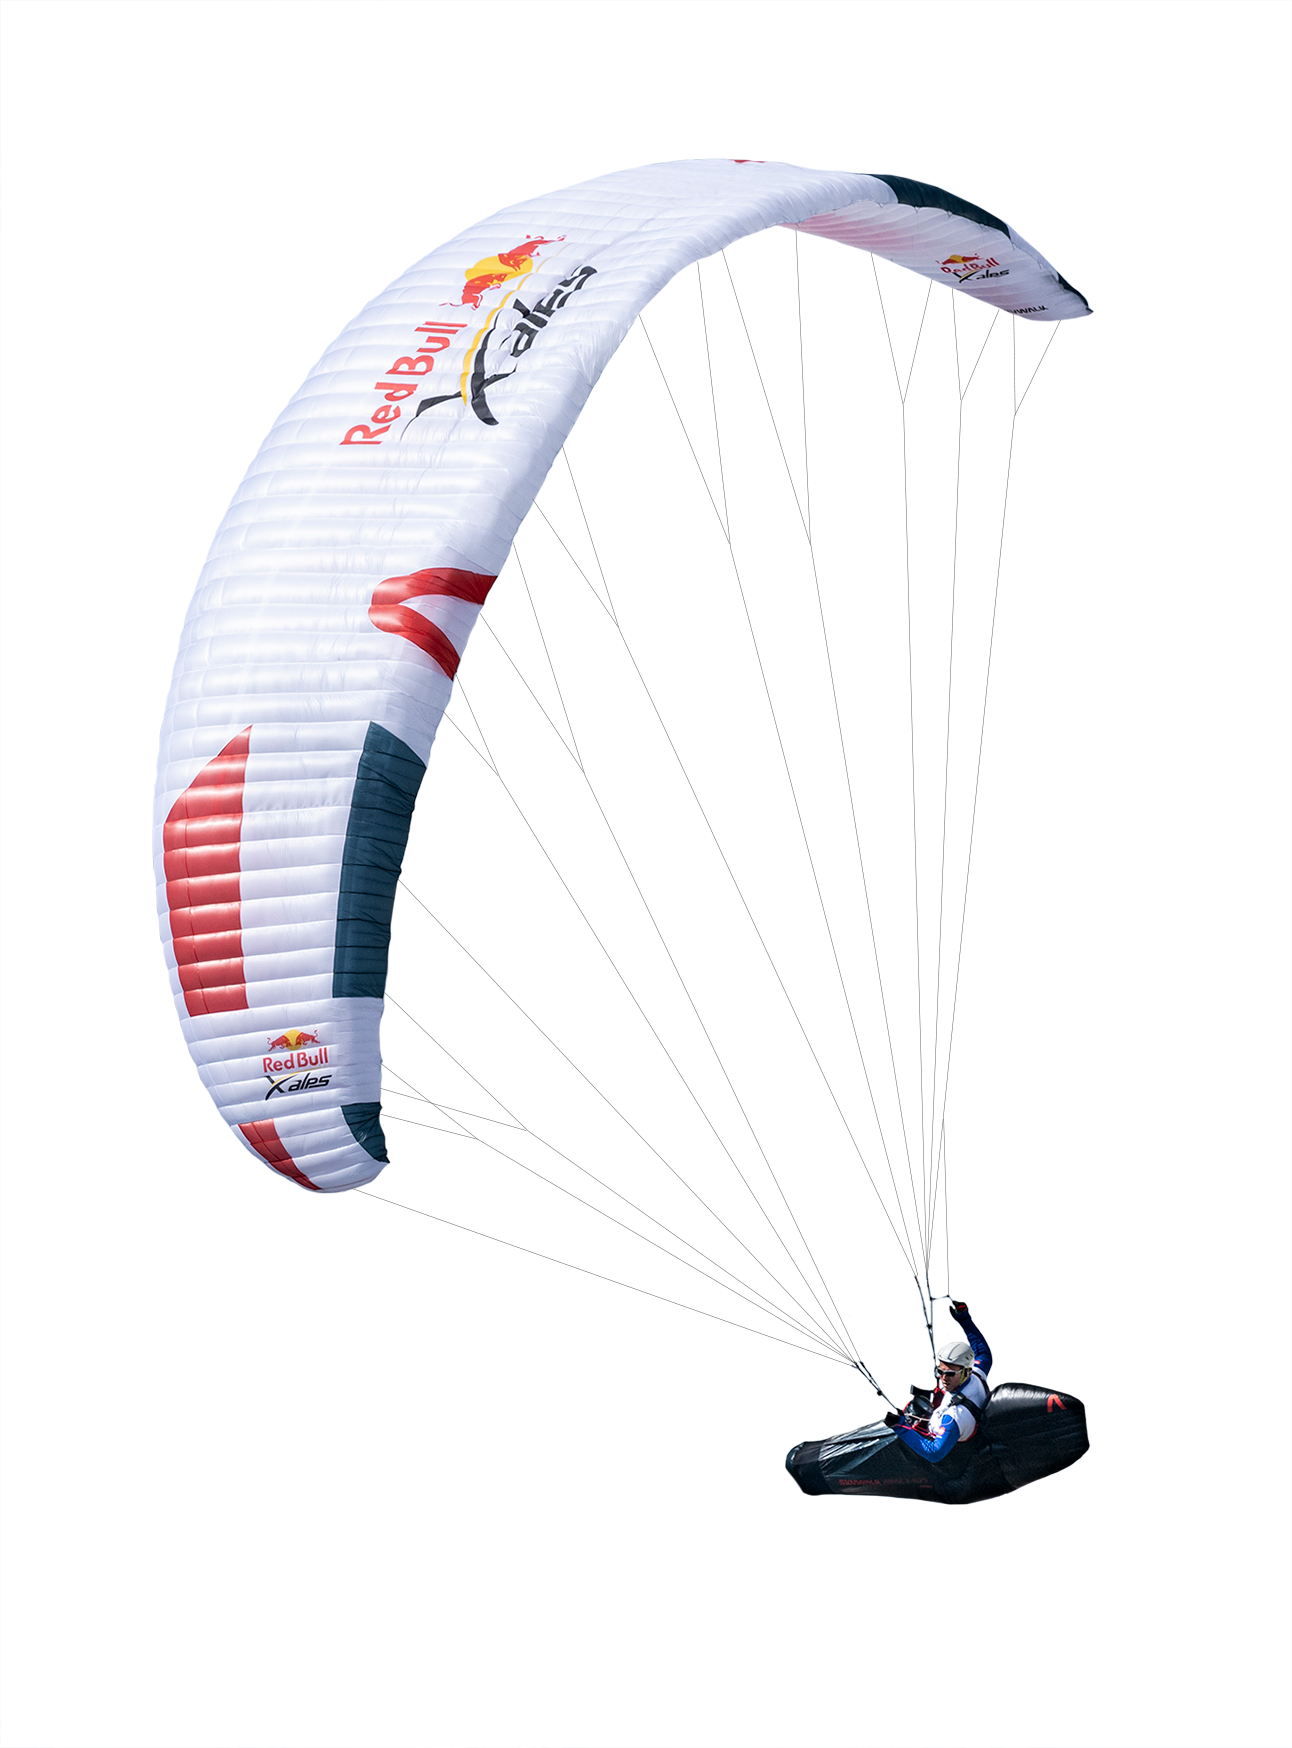 red bull x alps newsletter signup glider 2